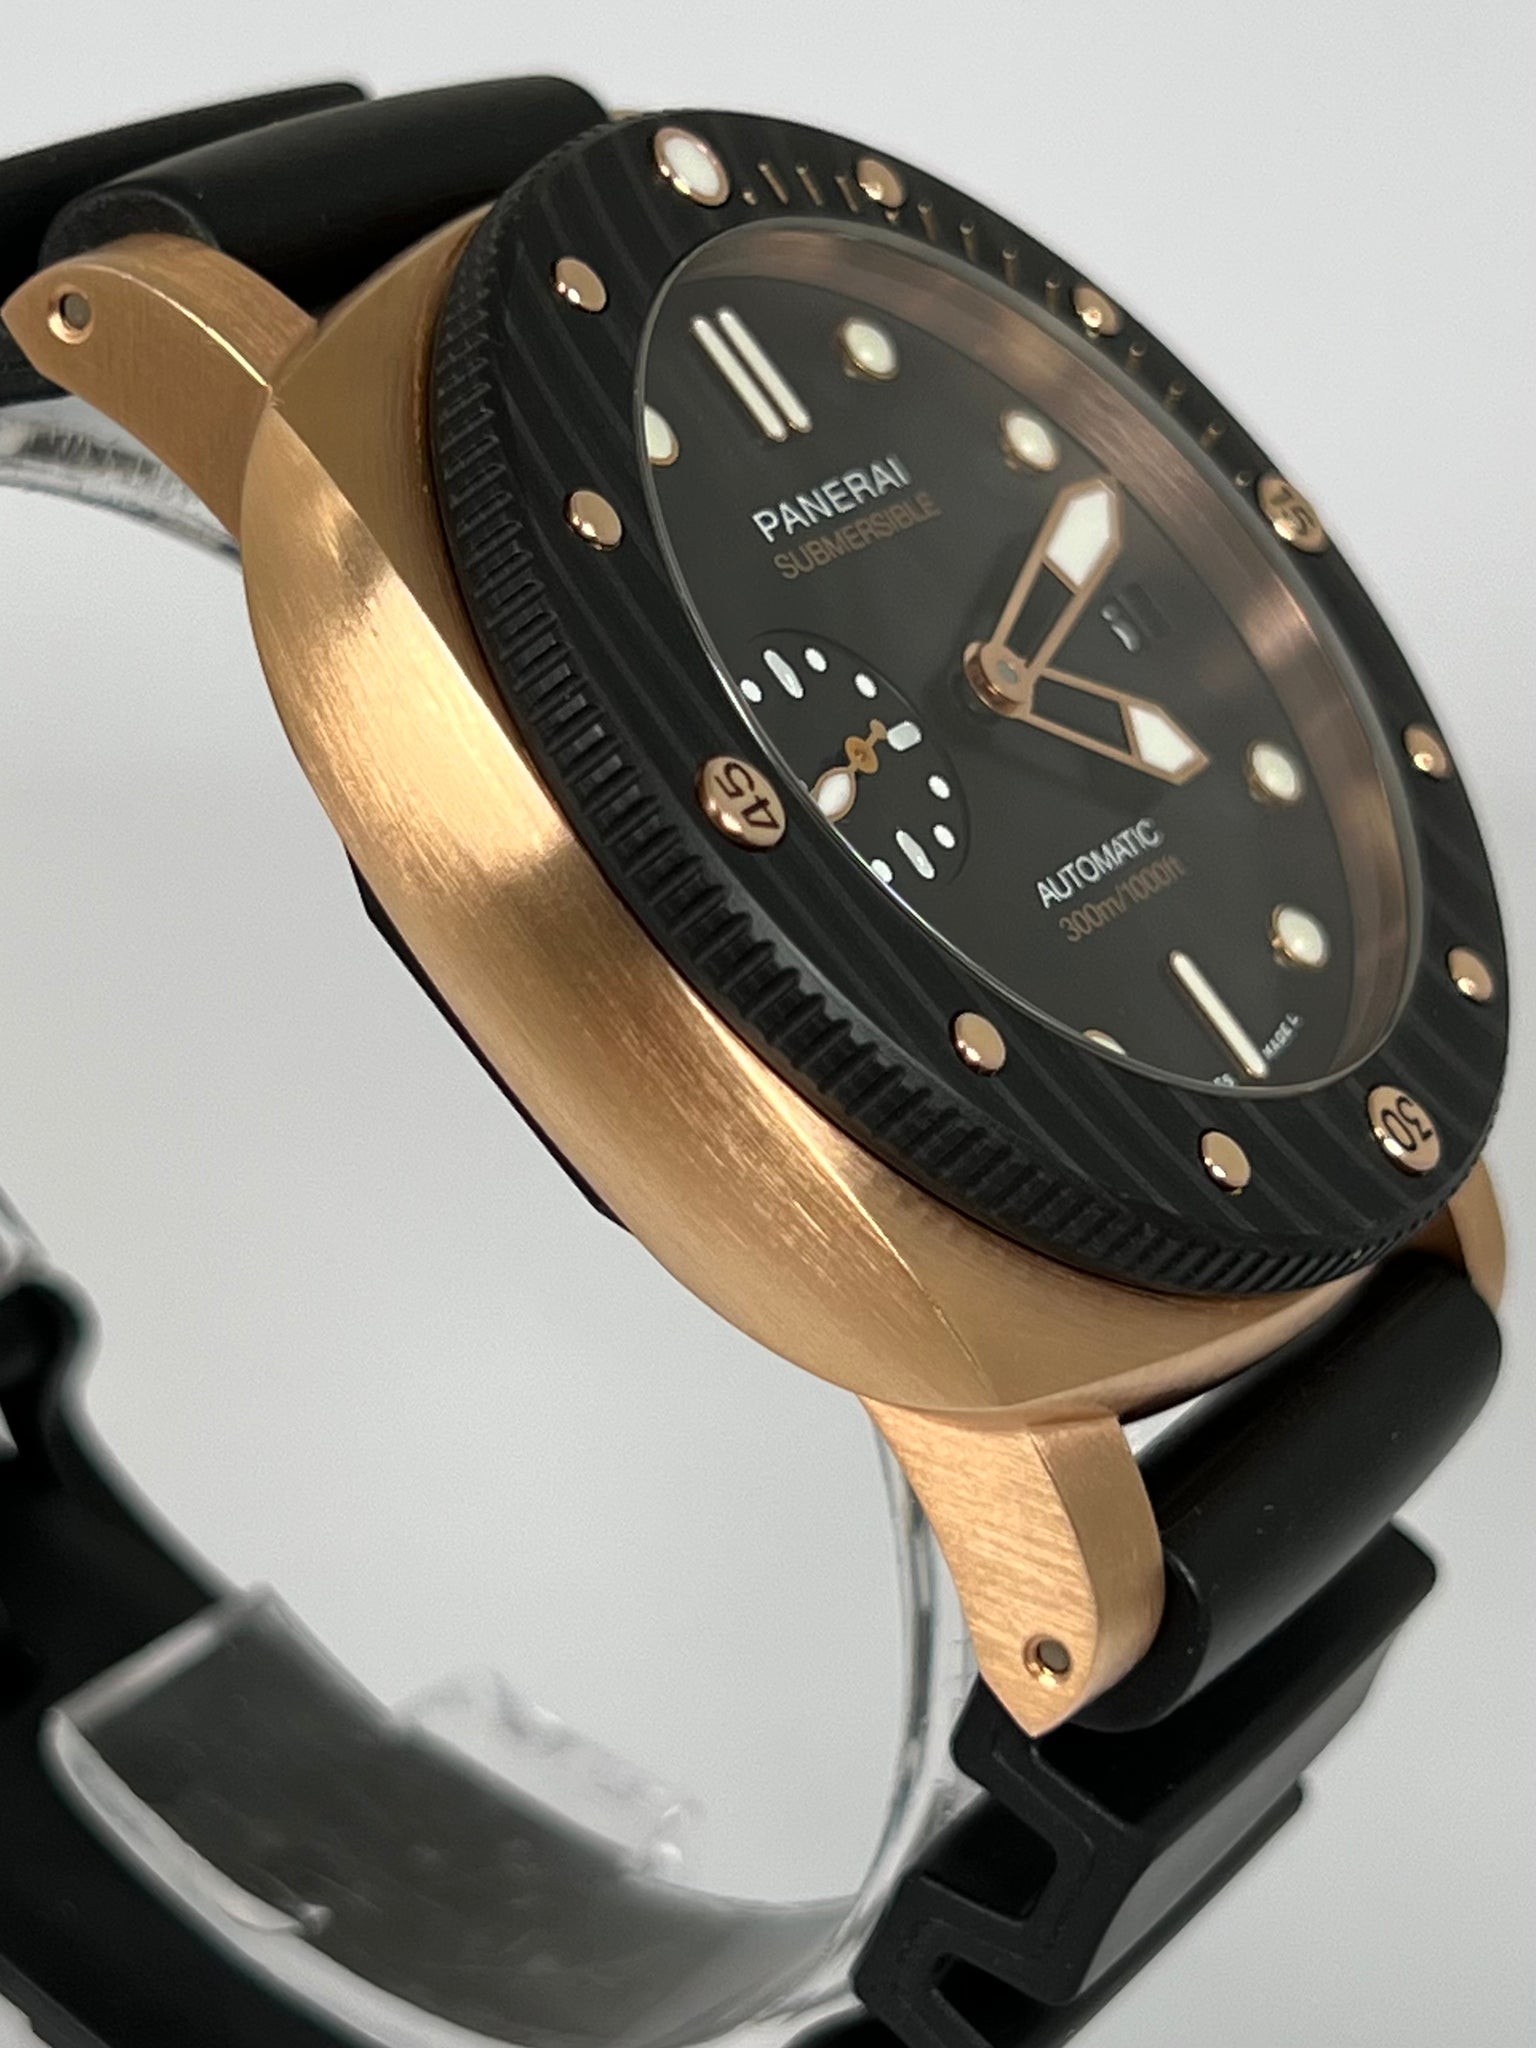 PANERAI SUBMERSIBLE GOLDTECH OROCARBO PAM01070